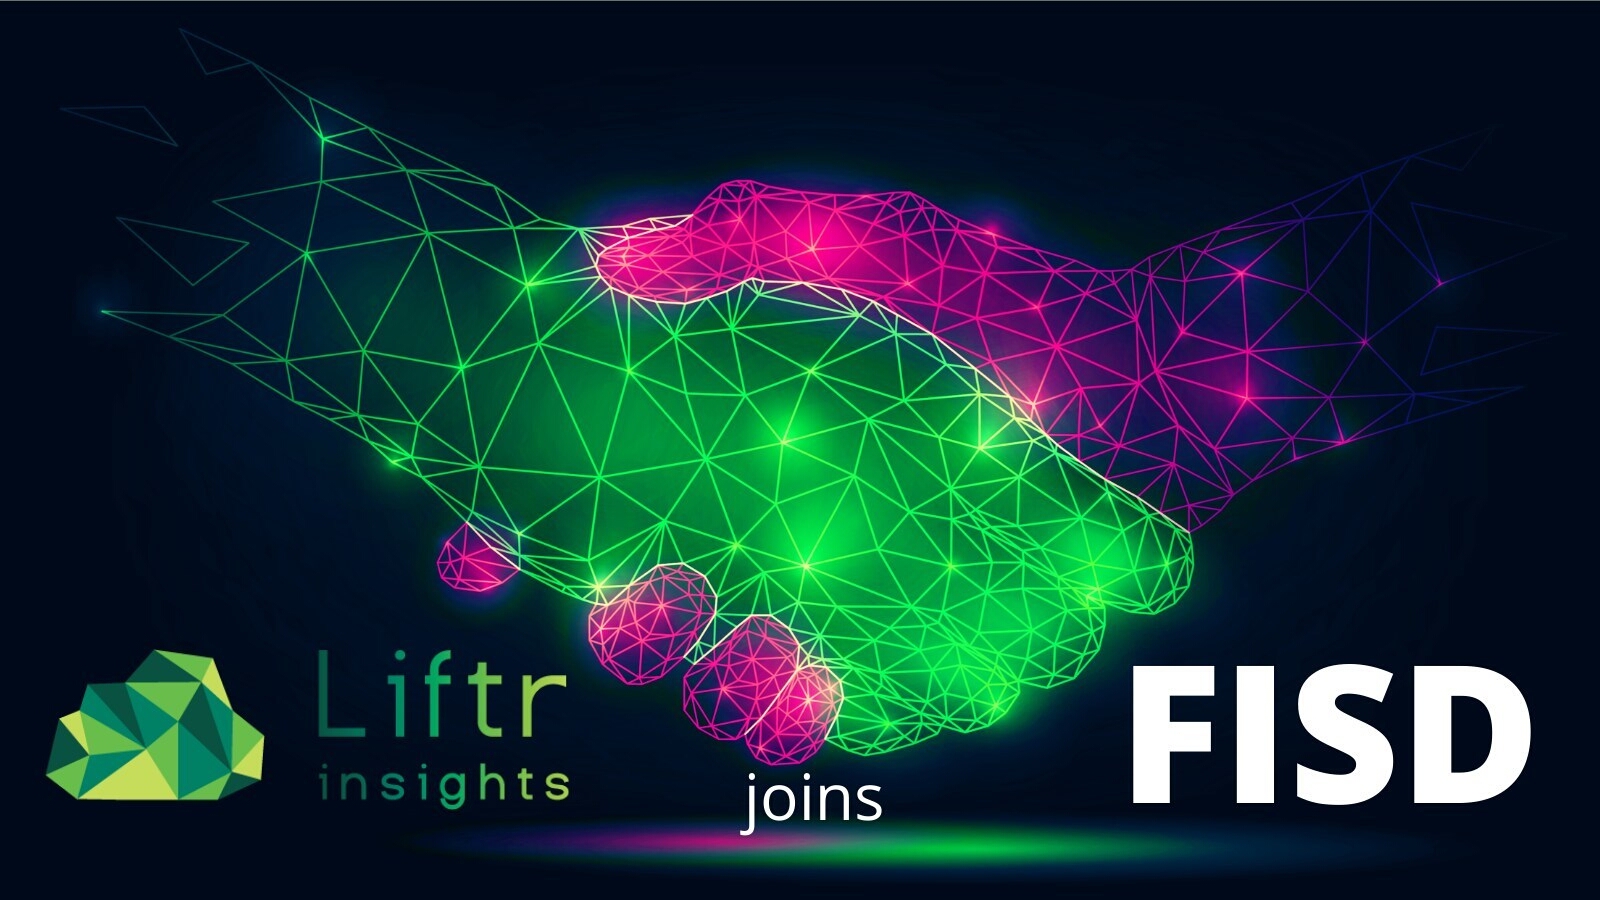 Liftr Insights joins FISD to support alternative data initiatives